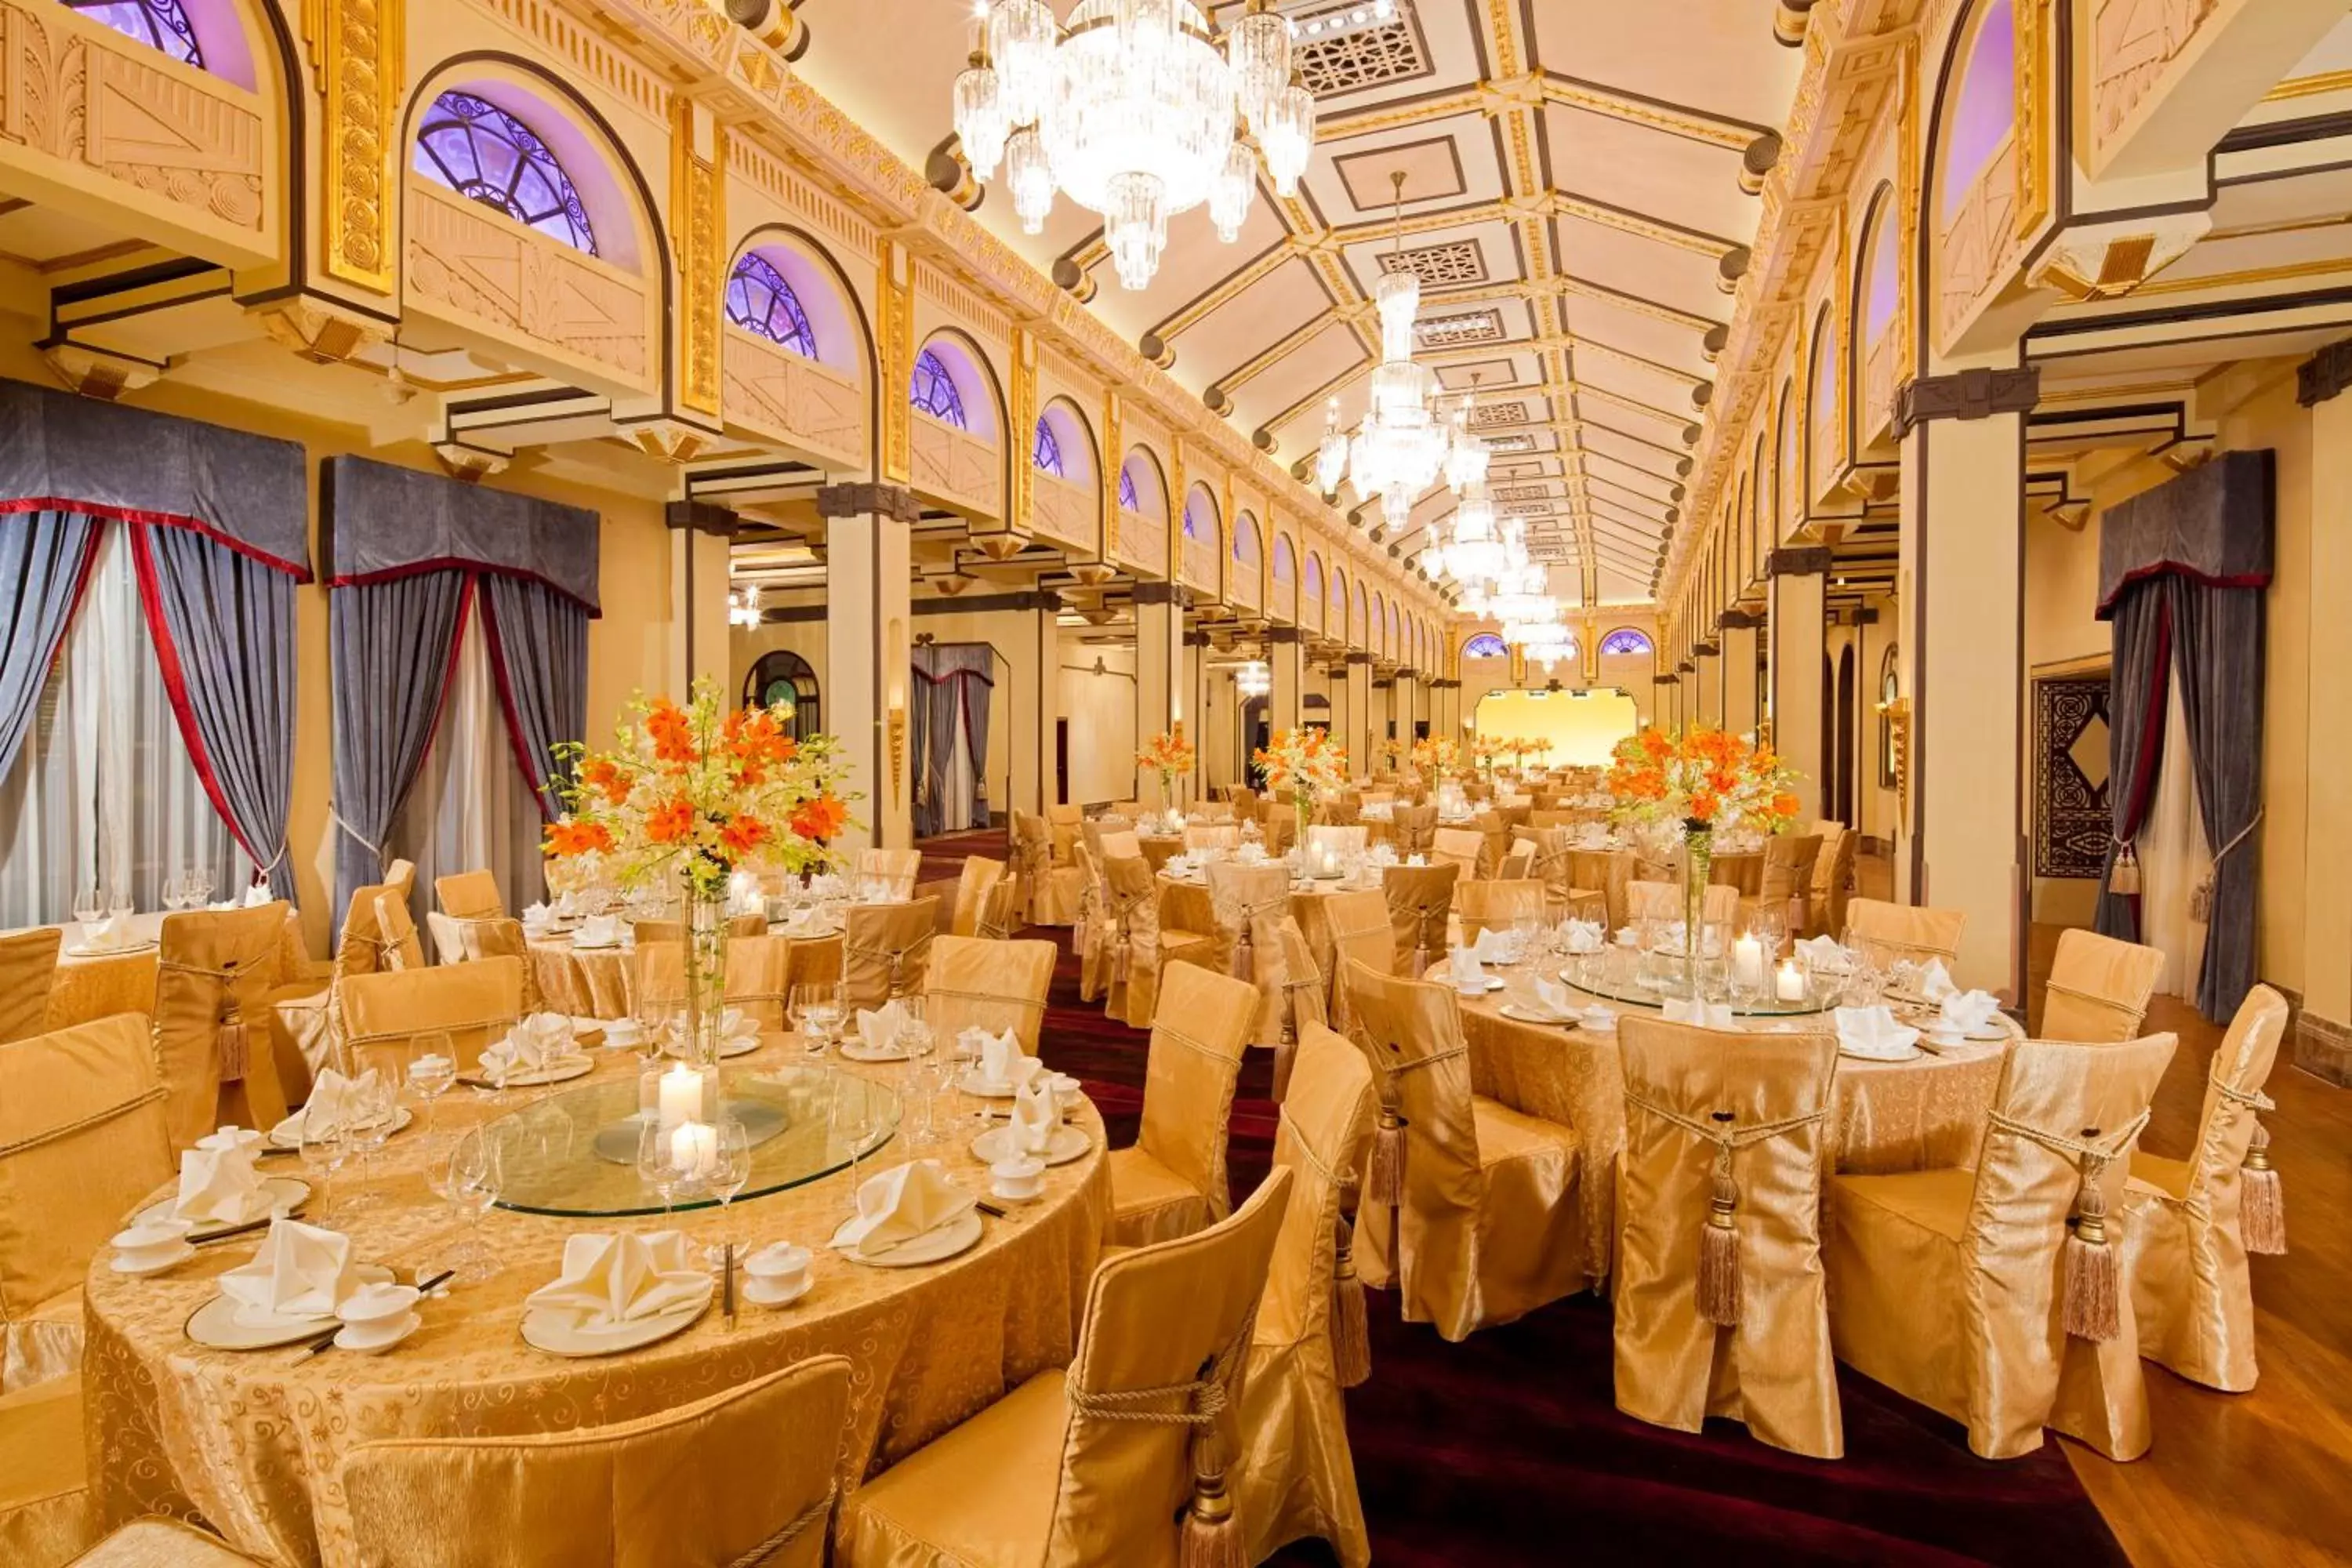 Banquet/Function facilities, Banquet Facilities in Fairmont Peace Hotel On the Bund (Start your own story with the BUND)